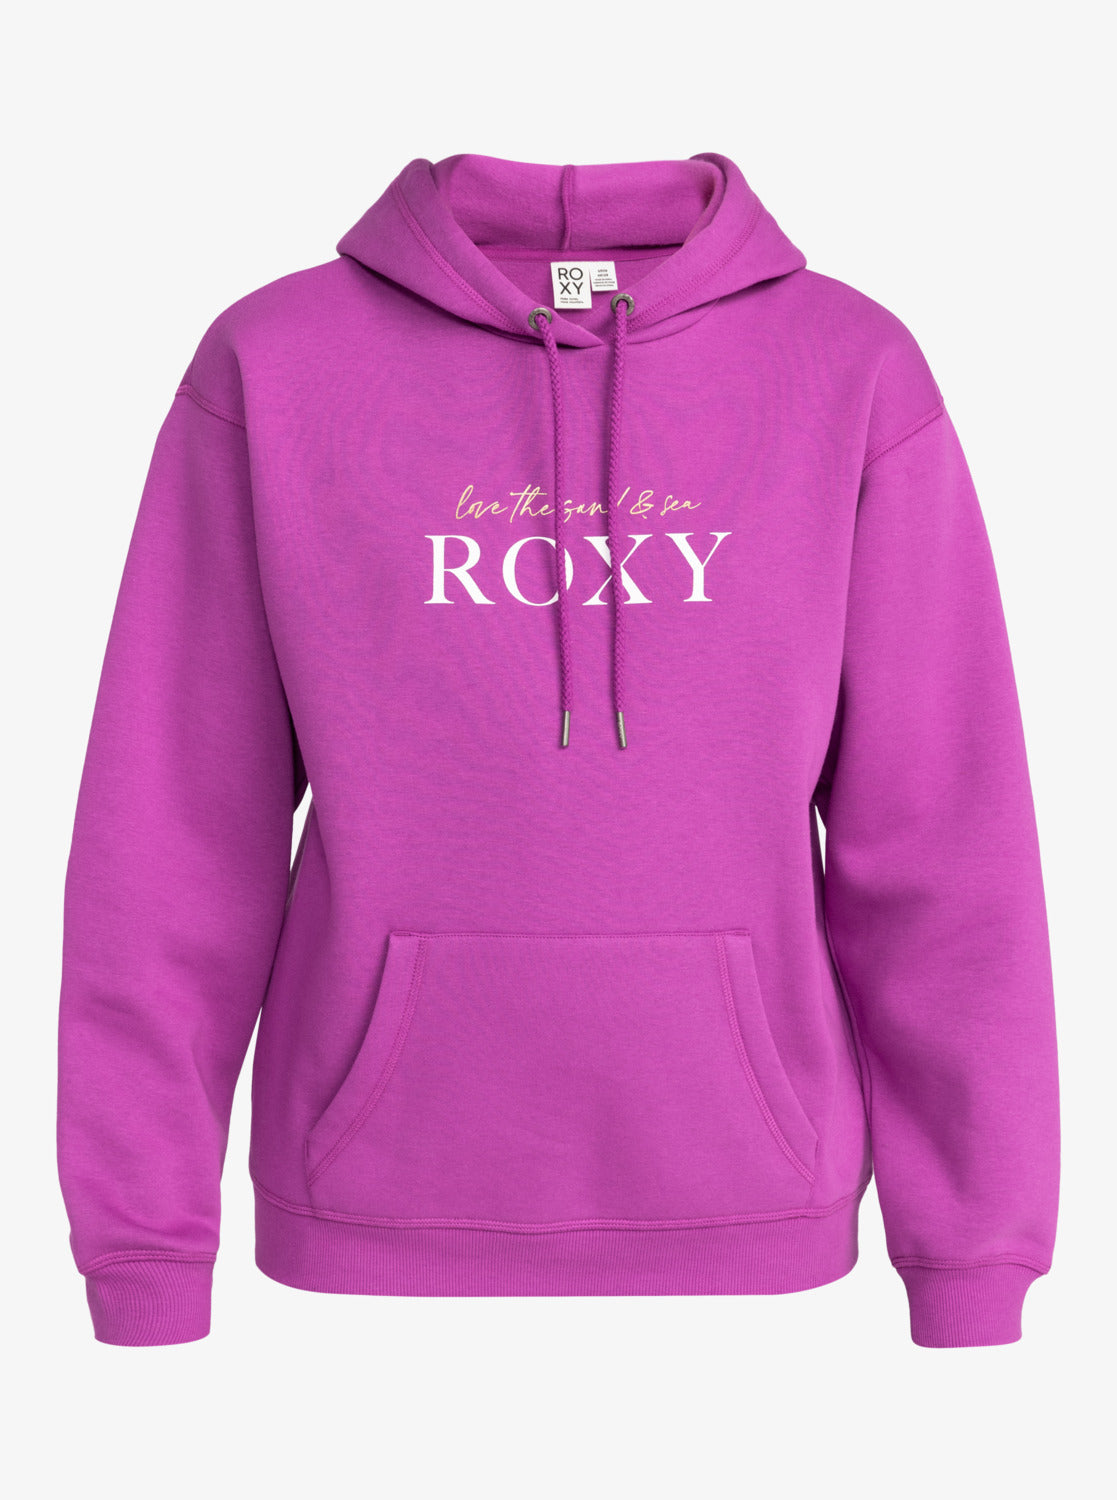 ROXY Surf Stoked Brushed - Hoodie for Women